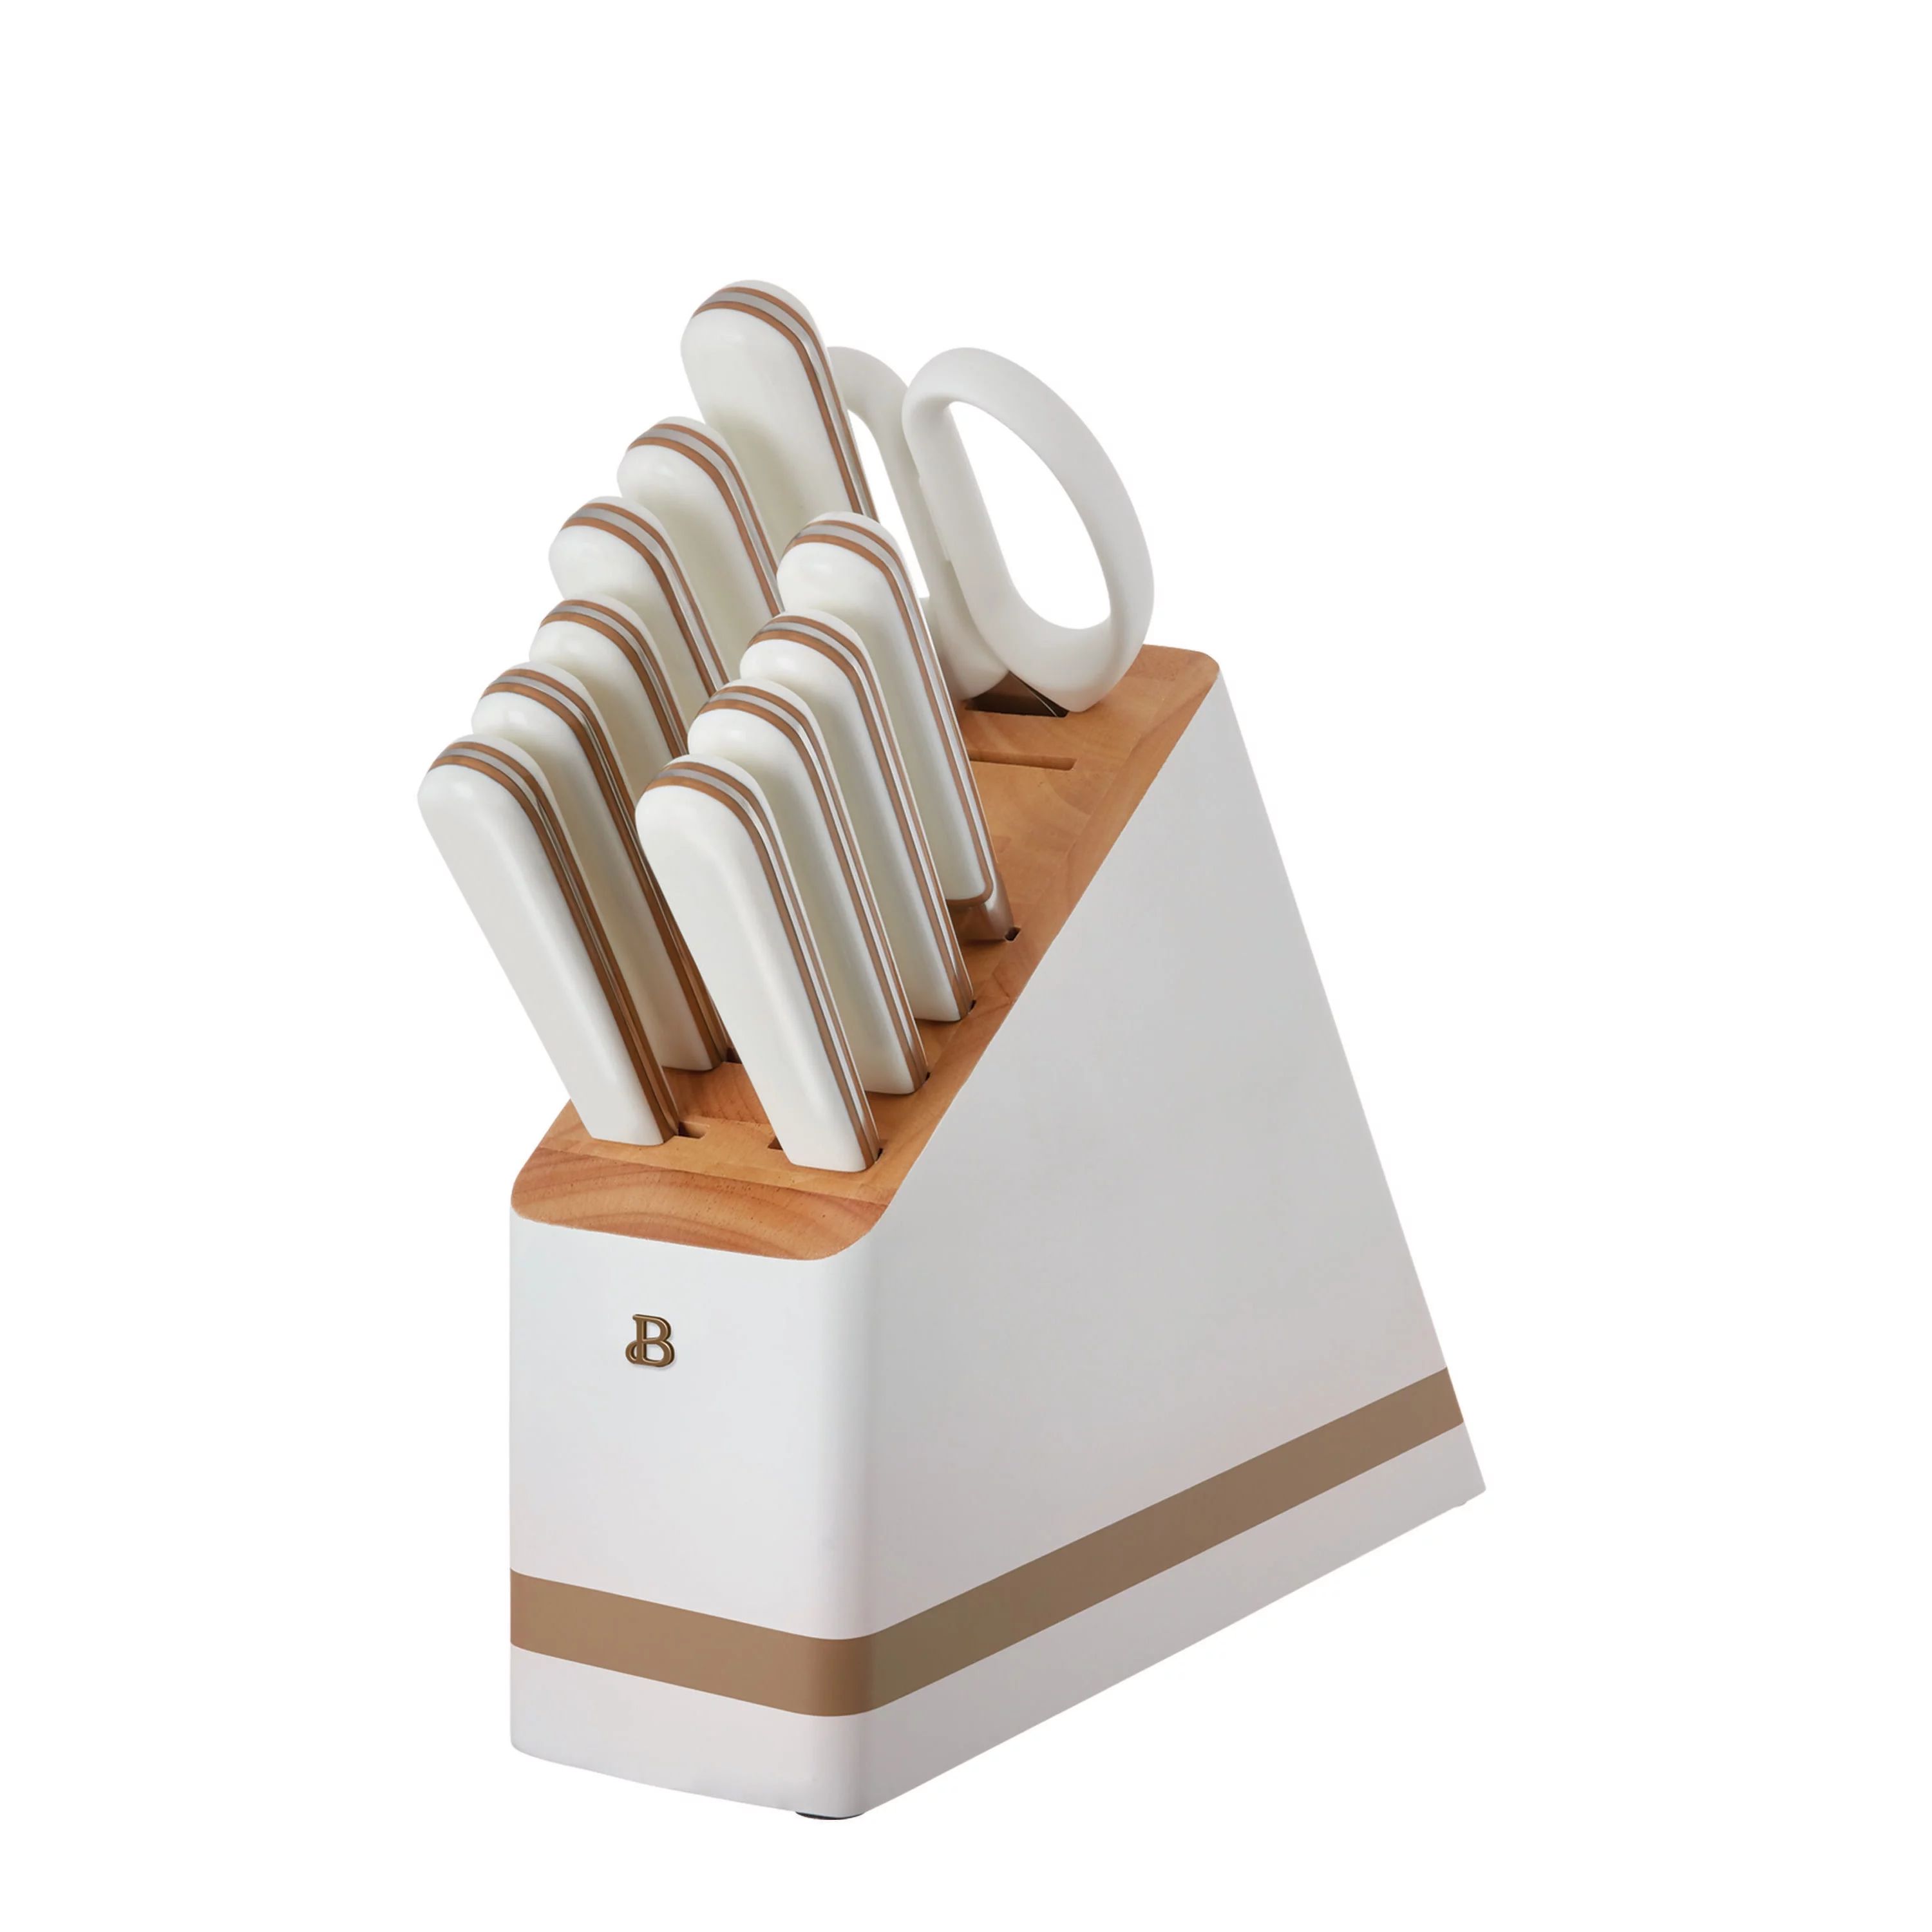 Beautiful 12-piece Forged Kitchen Knife Set in White with Wood Storage Block, by Drew Barrymore | Walmart (US)